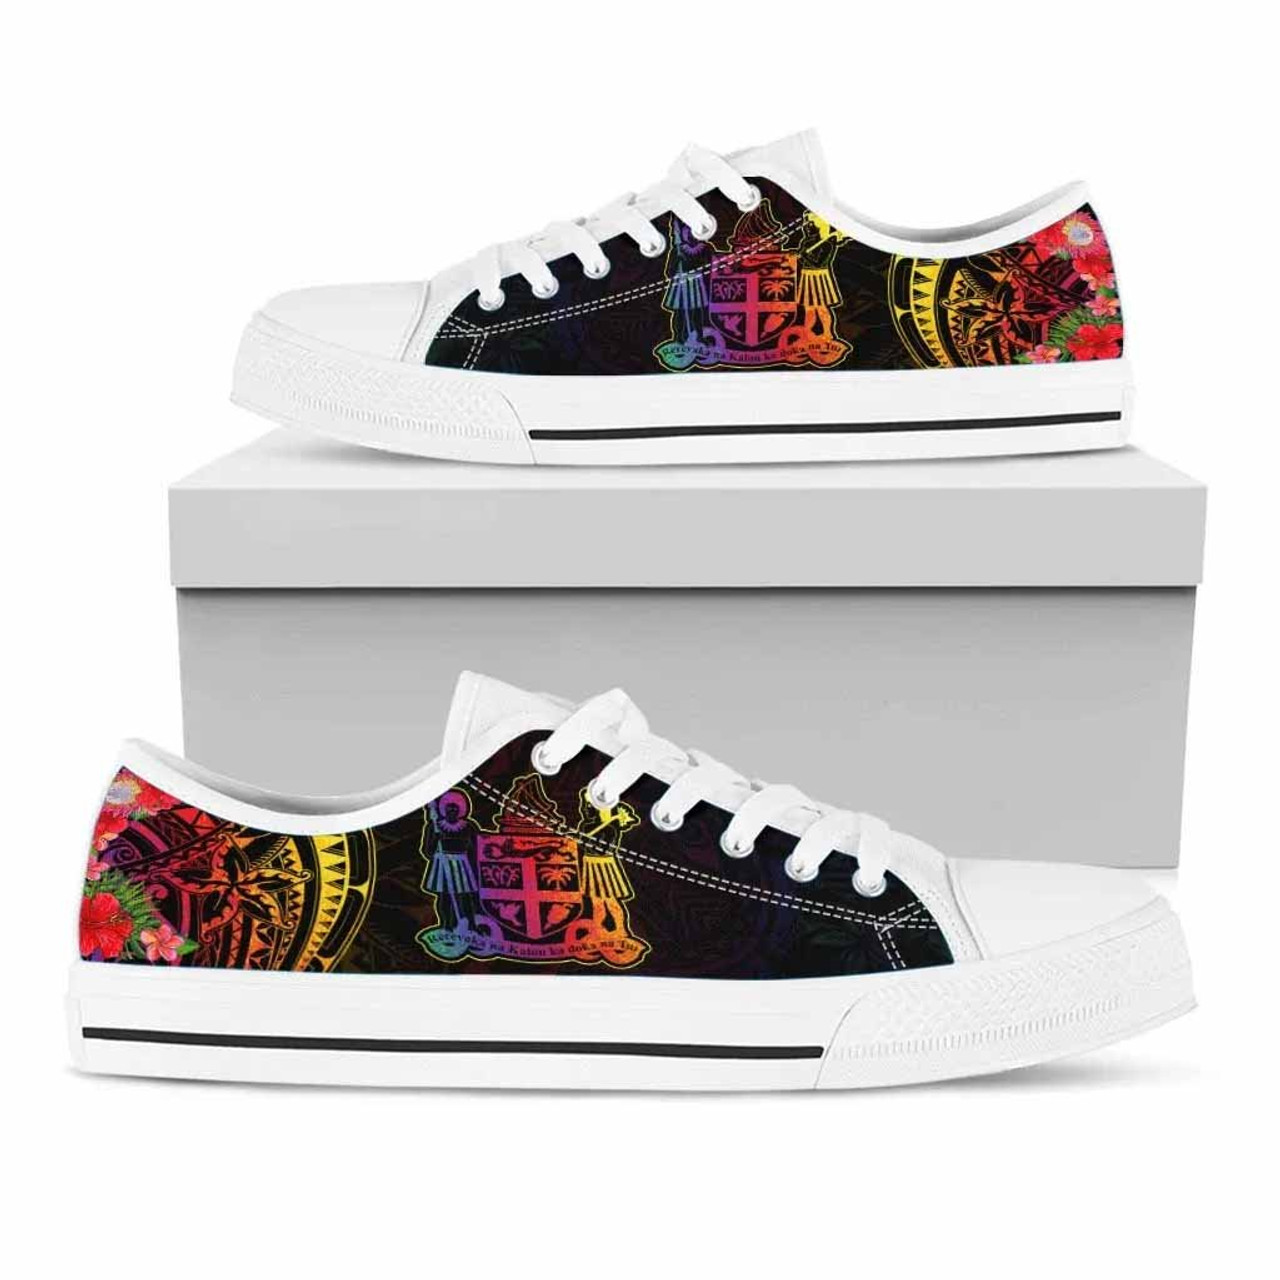 Fiji Low Top Shoes - Tropical Hippie Style 4